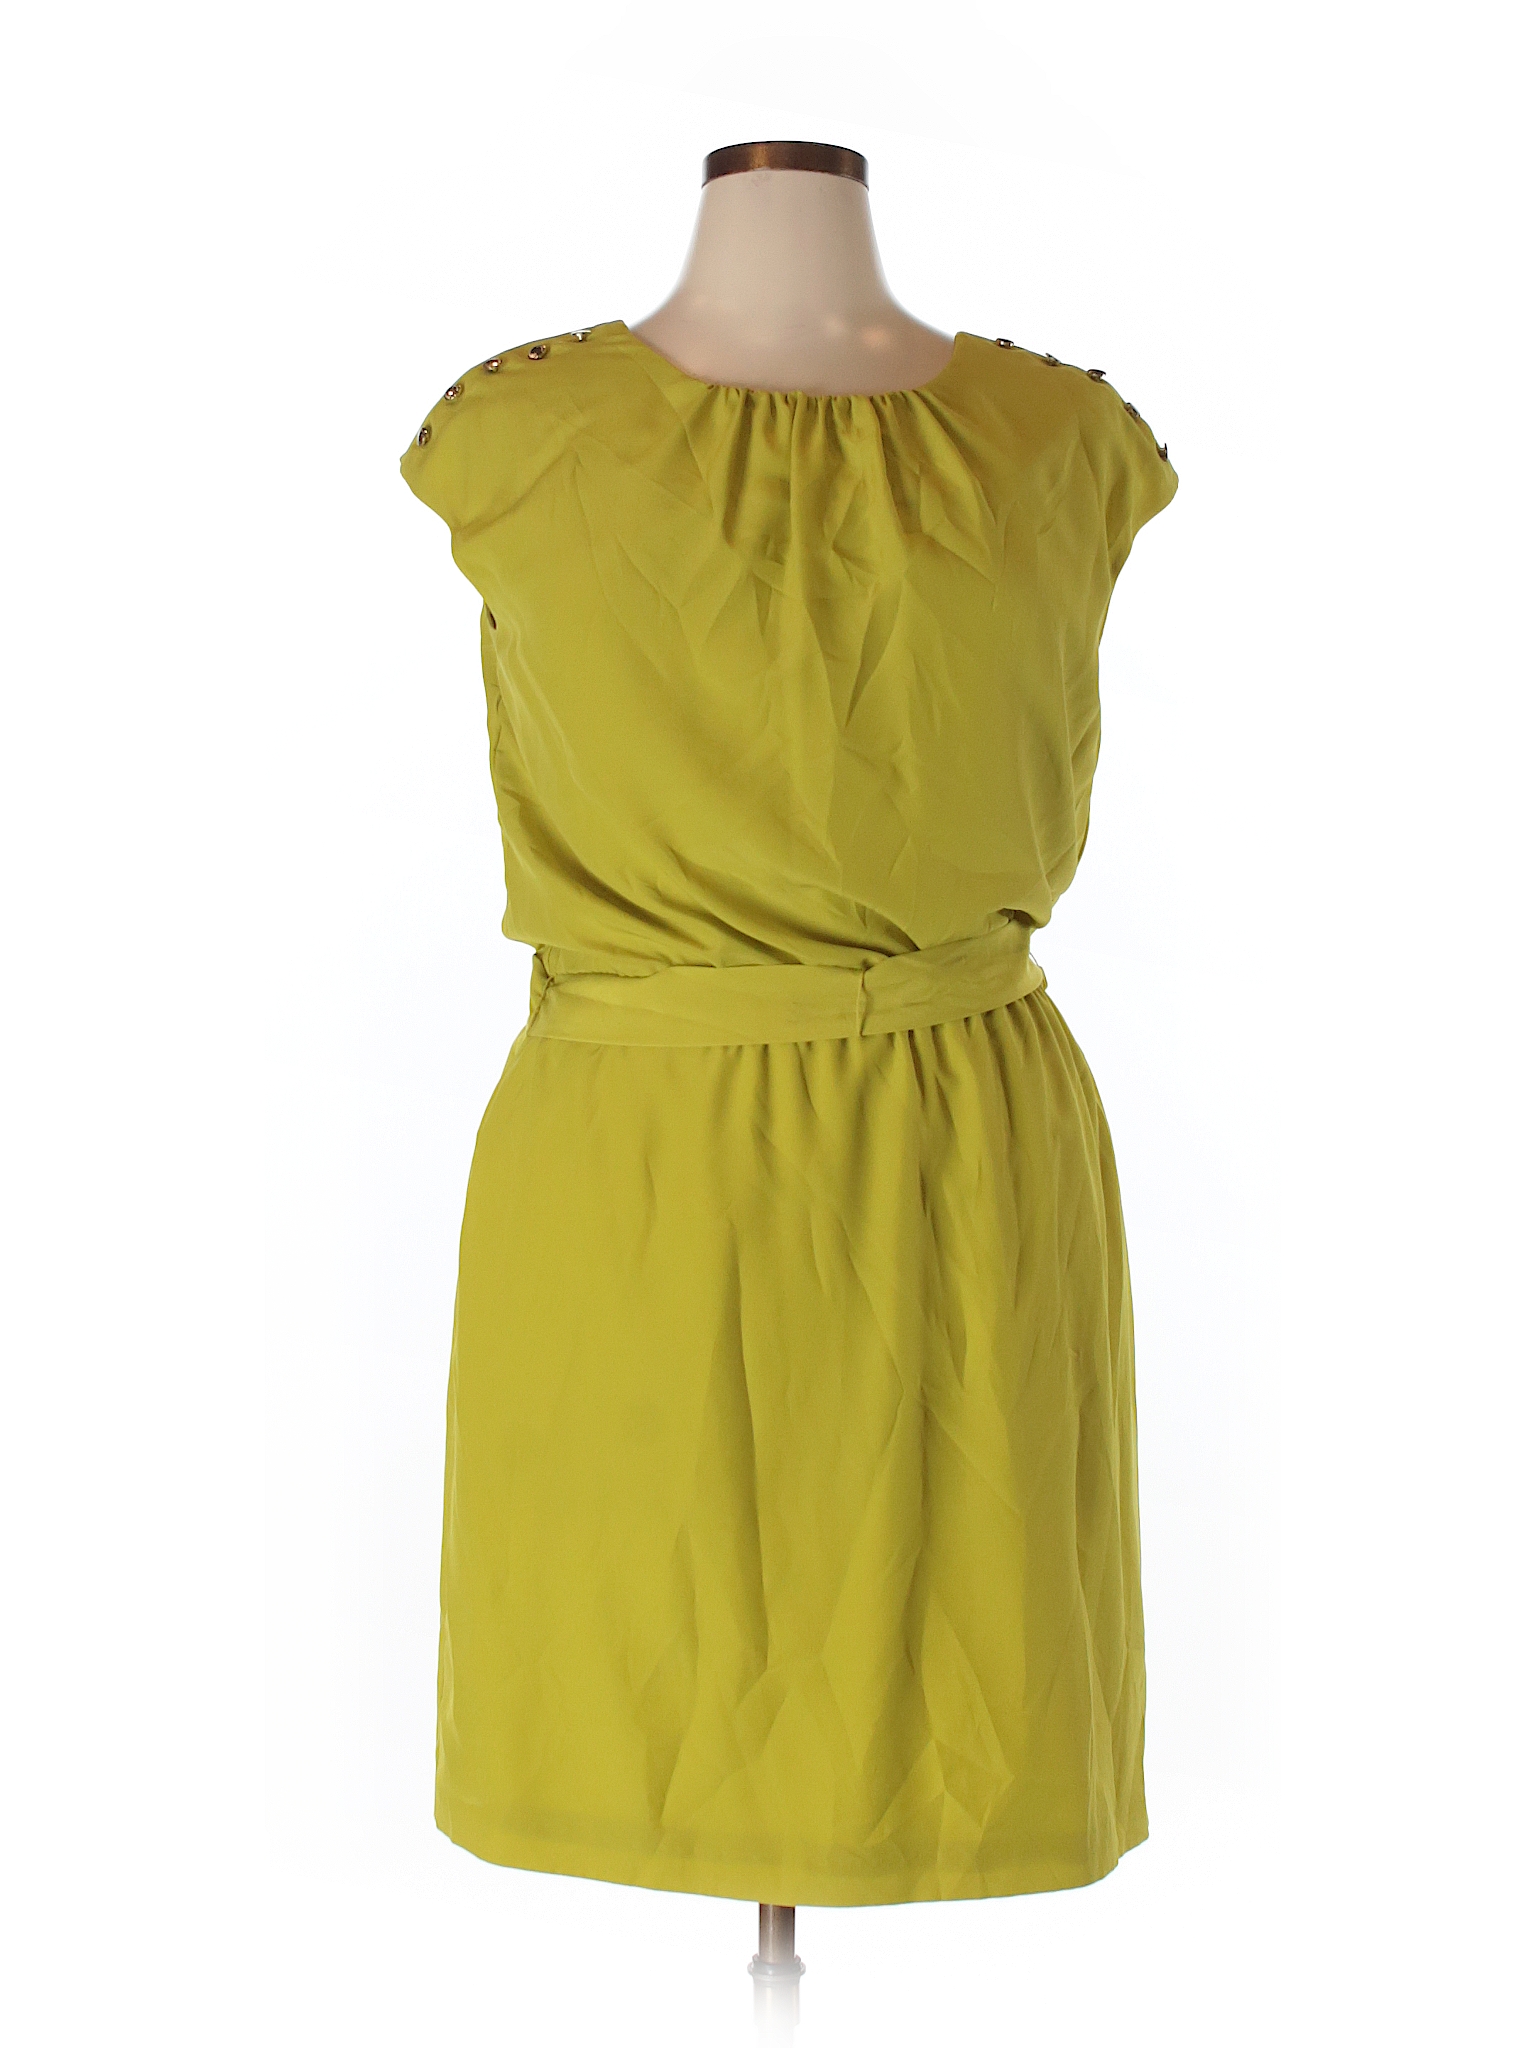 Guess 100% Polyester Solid Light Green Casual Dress Size 14 - 75% off ...